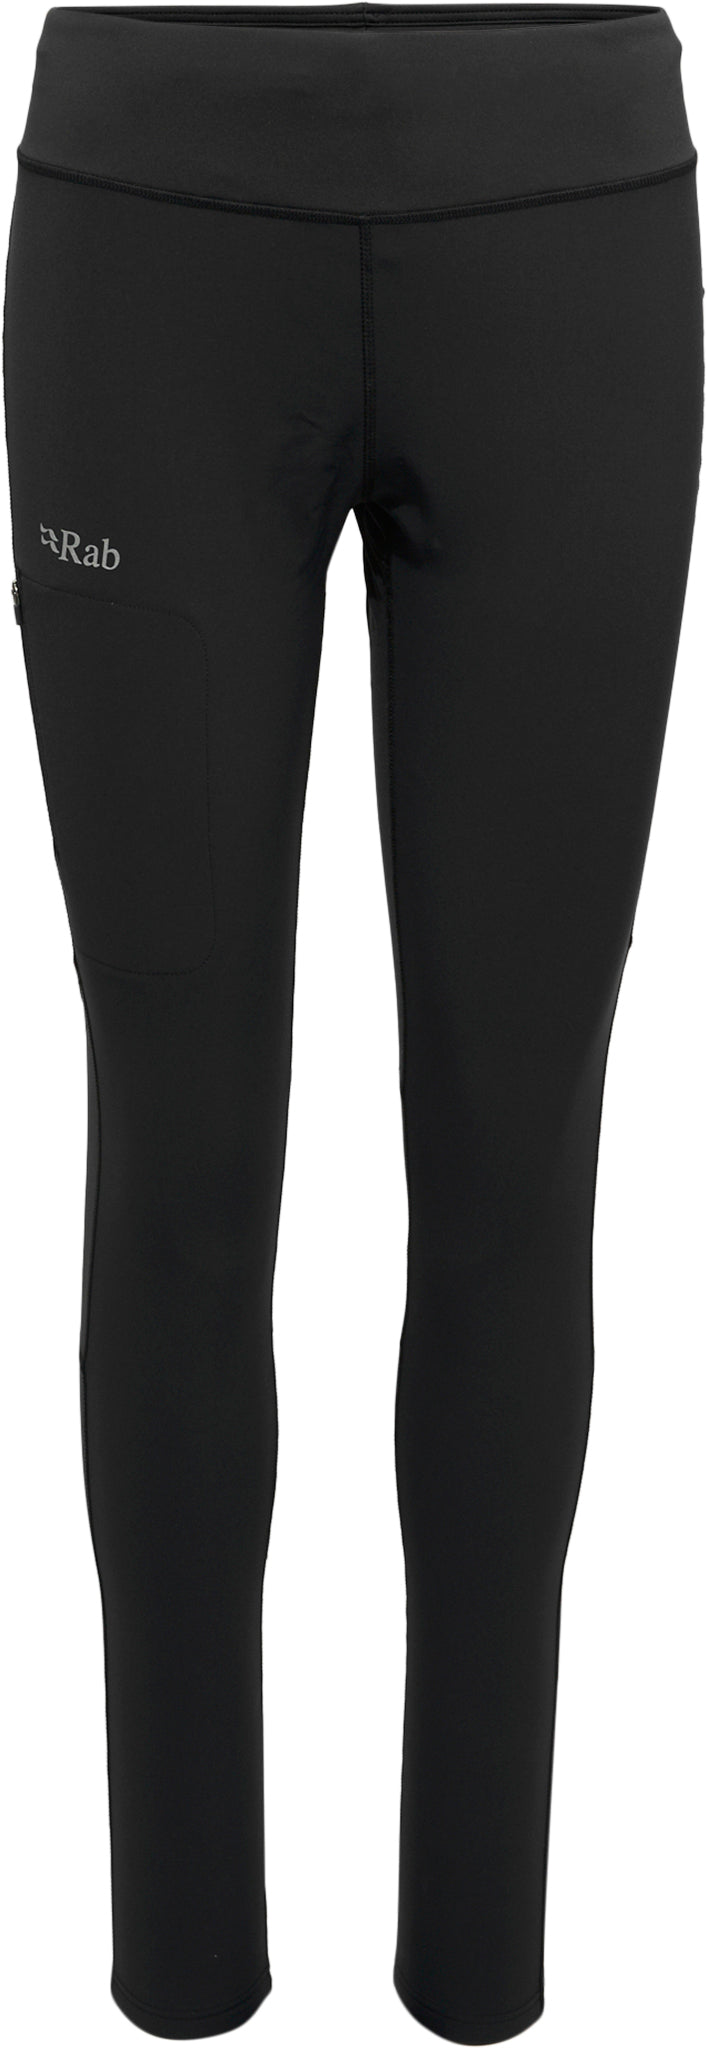 Patagonia Maipo 7/8 Tights Women's